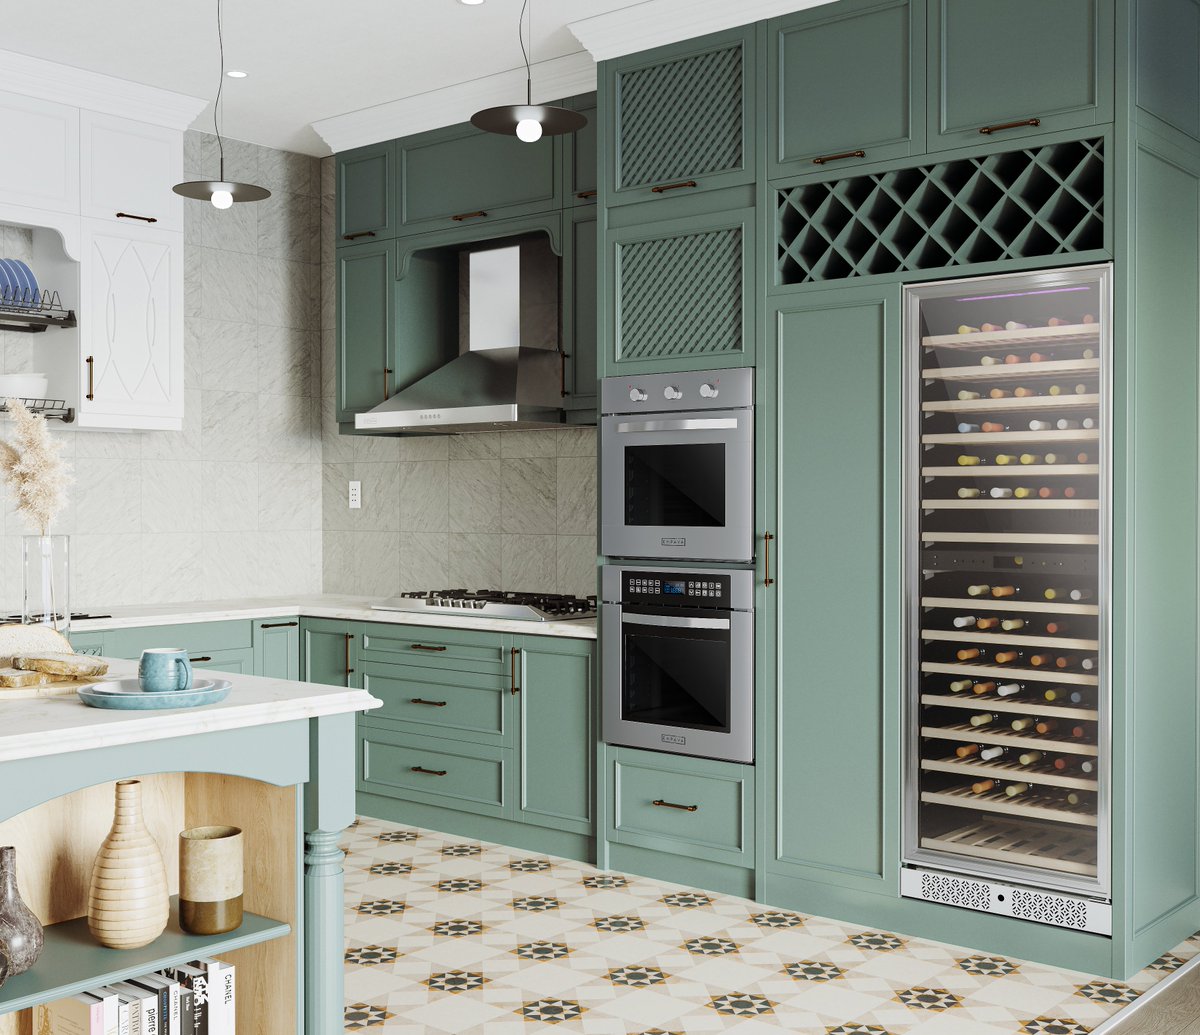 This is what I've been dreaming about my kitchen. The vintage green really makes me feel delightful about cooking. How is your beautiful kitchen? Share with us!
Link> kitchenappliancestore.com
#Empava #Cooking #RangeGas #cooktop #oven #home #kitchen #cook #cooklikeagod